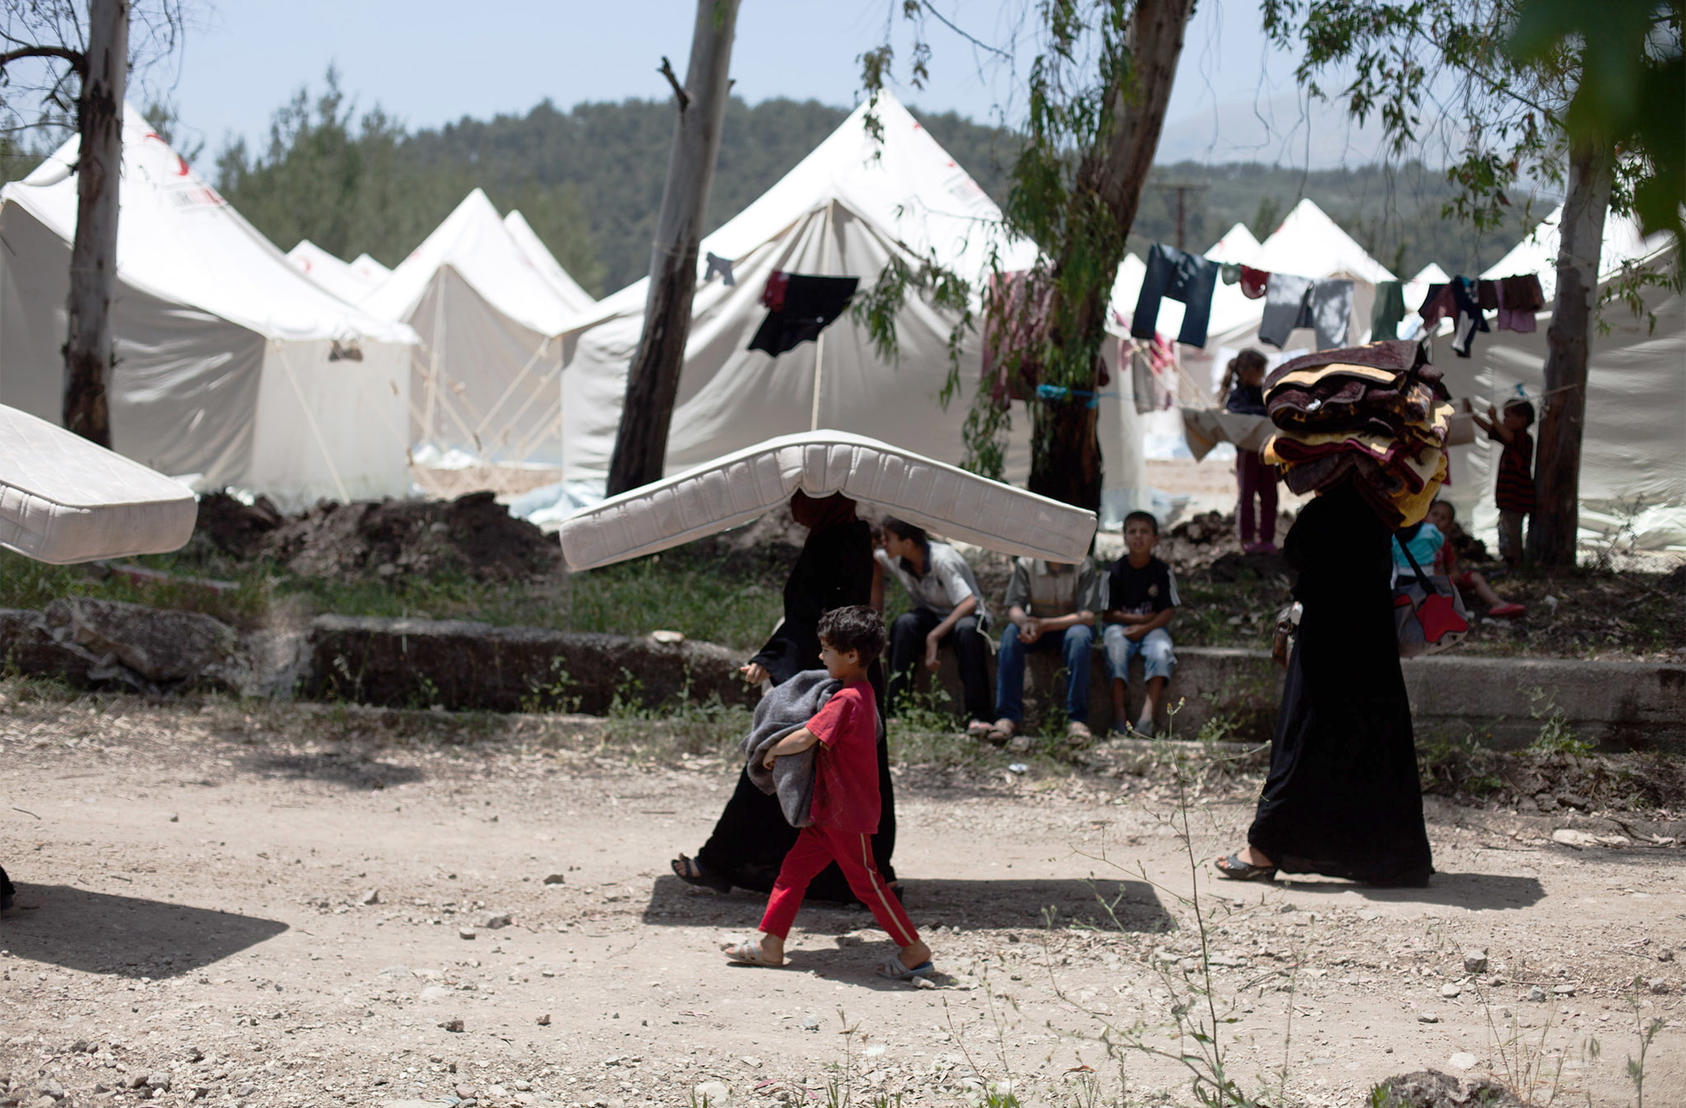 Women carry a mattress and blankets through a Syrian refugee camp in Yayladagi, Turkey on June 10, 2011. (The New York Times)